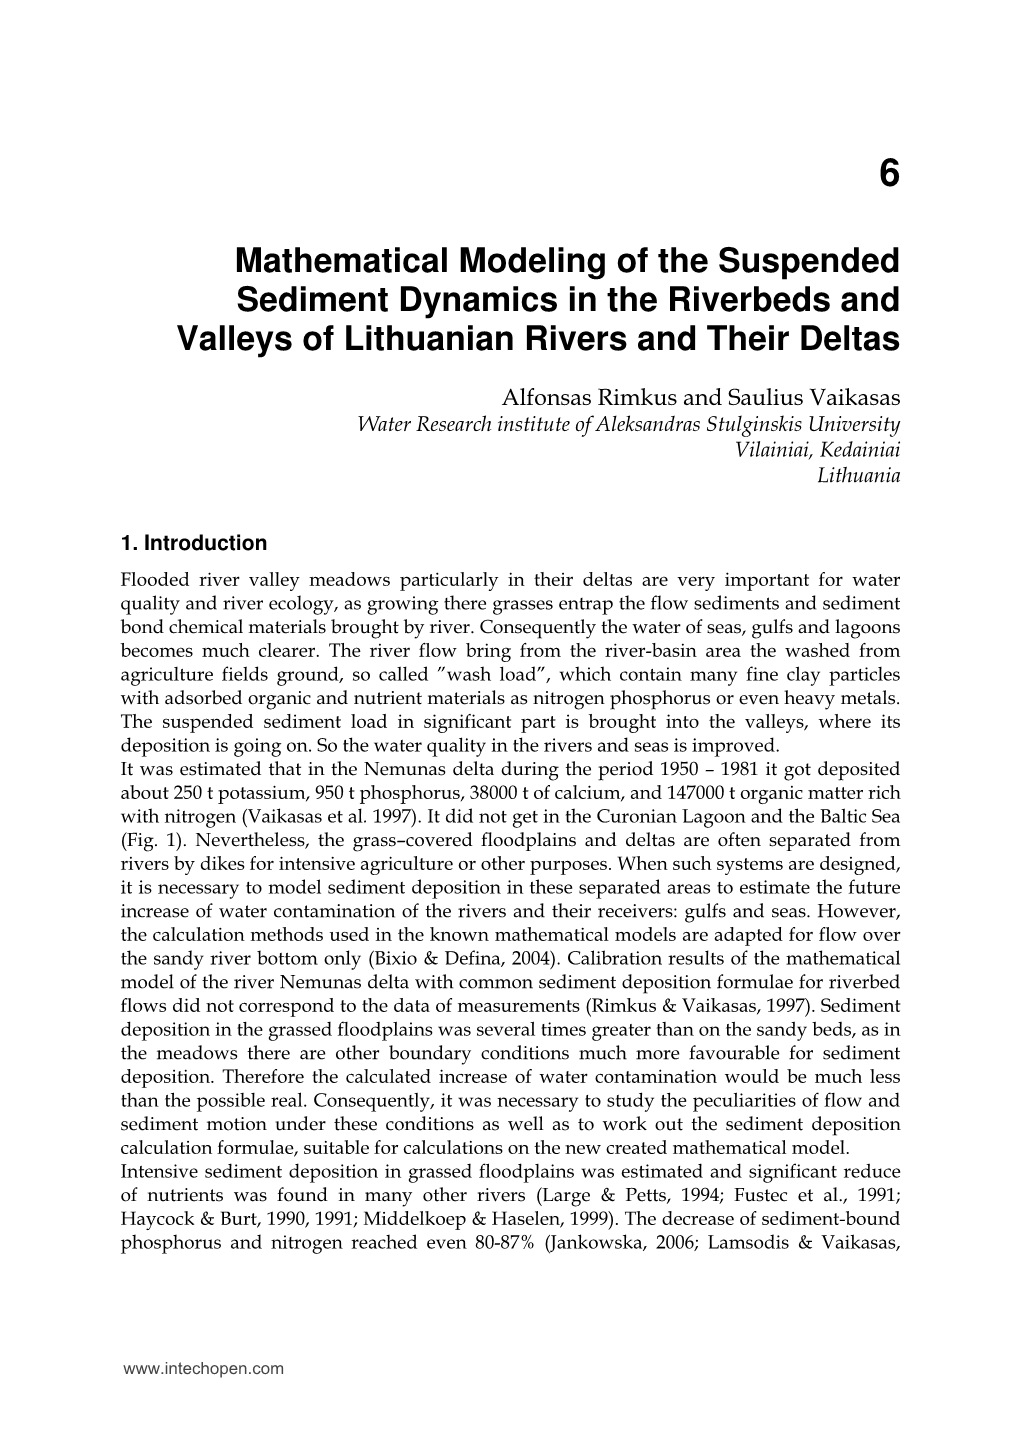 Mathematical Modeling of the Suspended Sediment Dynamics in the Riverbeds and Valleys of Lithuanian Rivers and Their Deltas